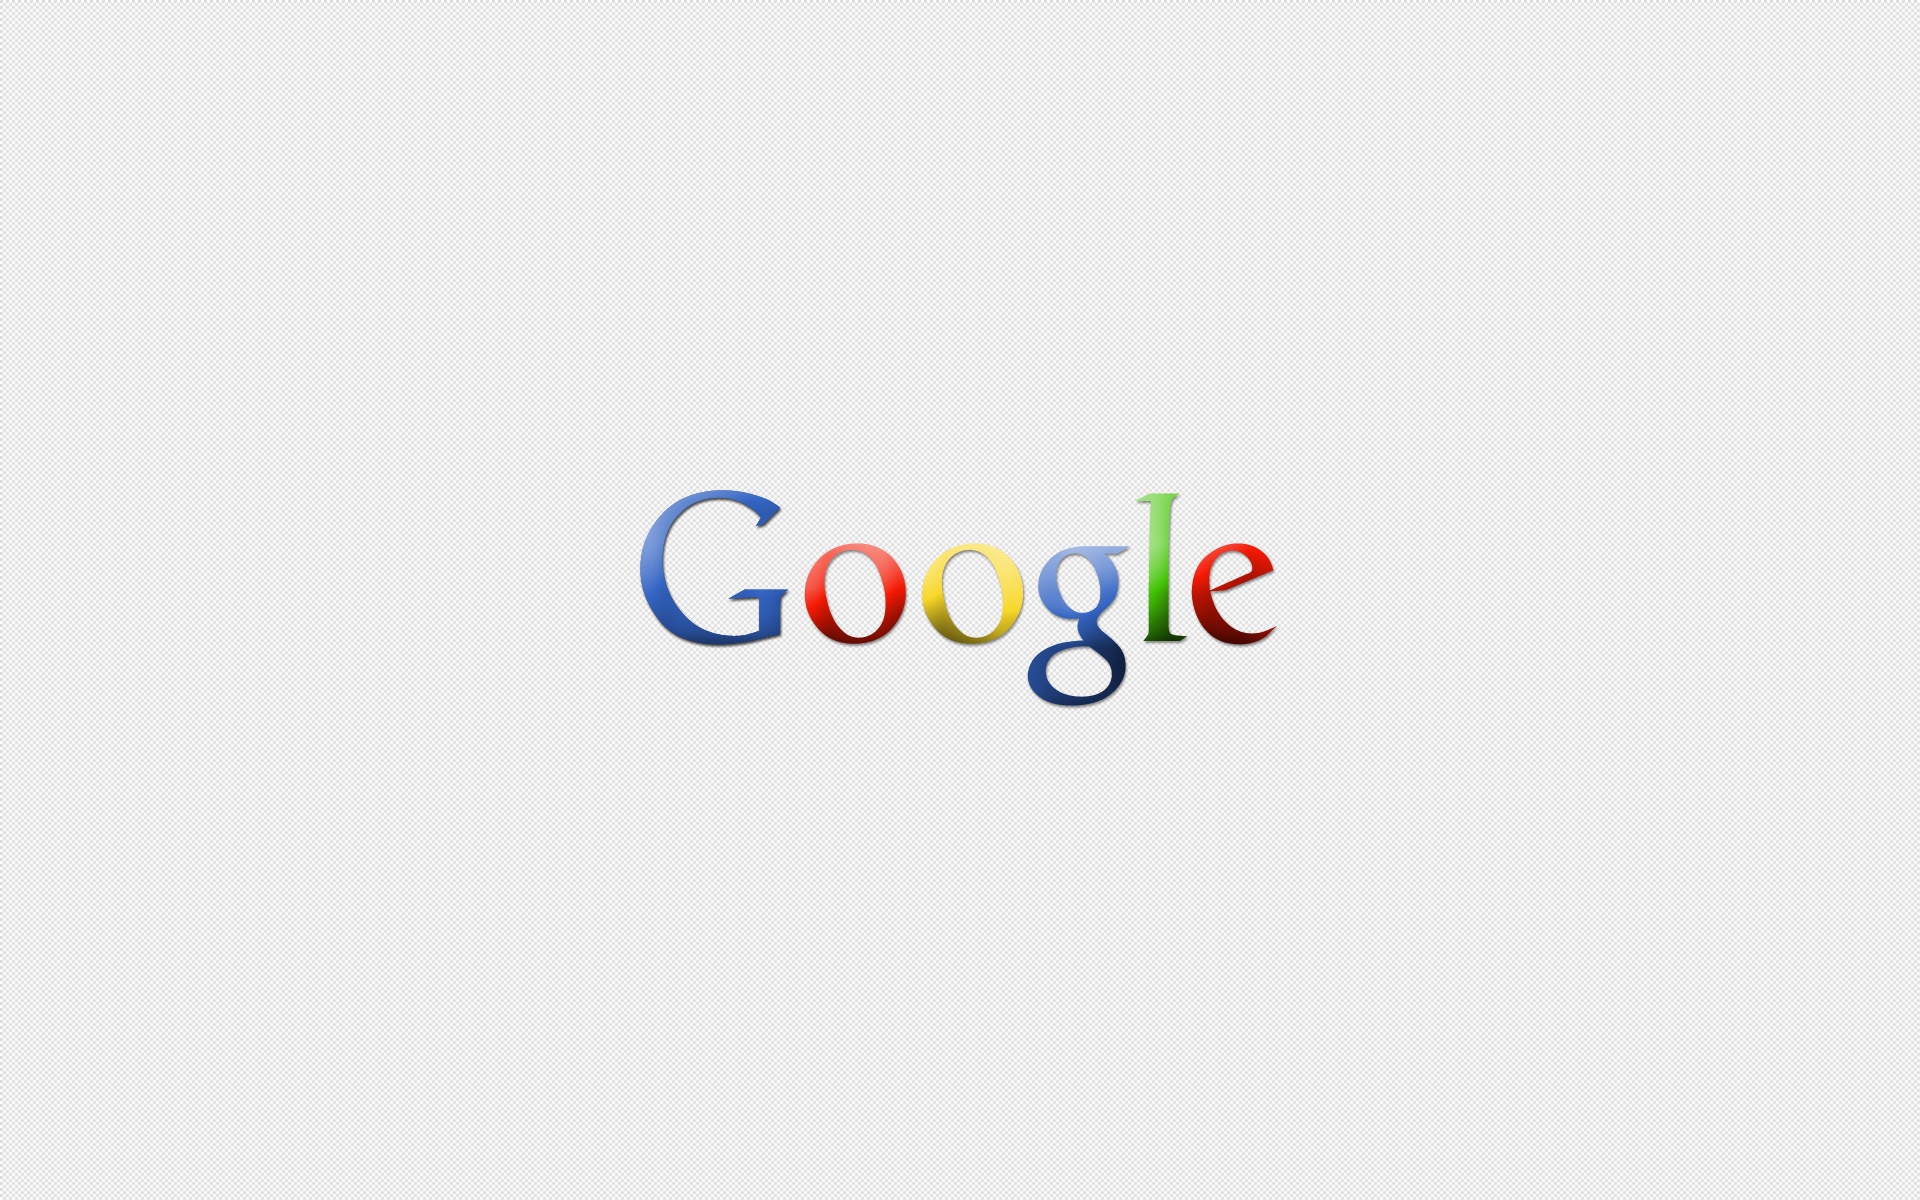 Google Search Wallpaper And Image Pictures Photos